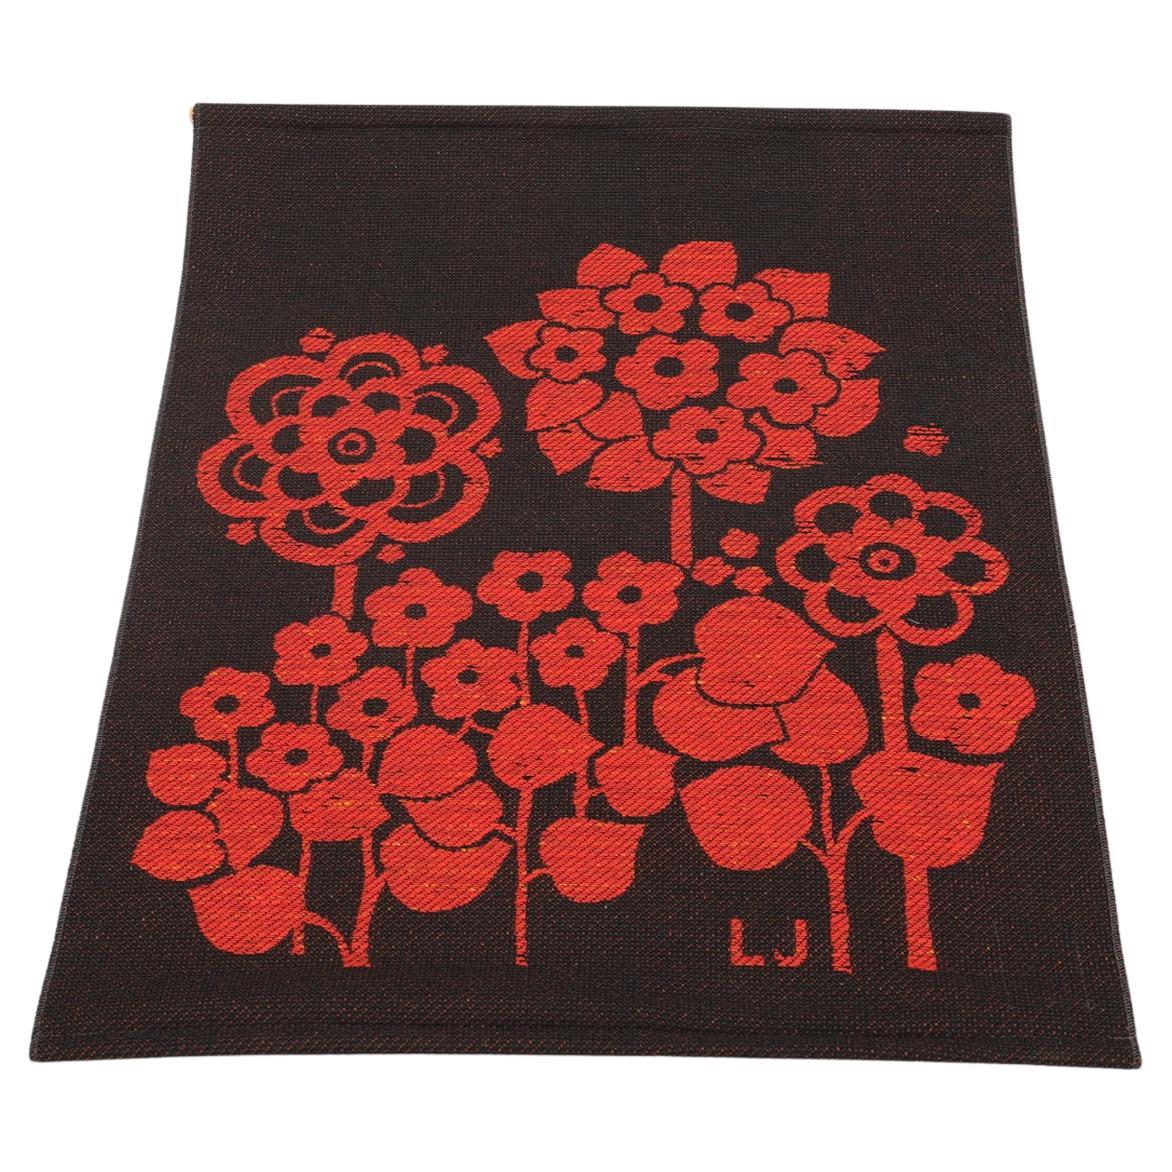 1970s Swedish Floral Wall Hanging For Sale